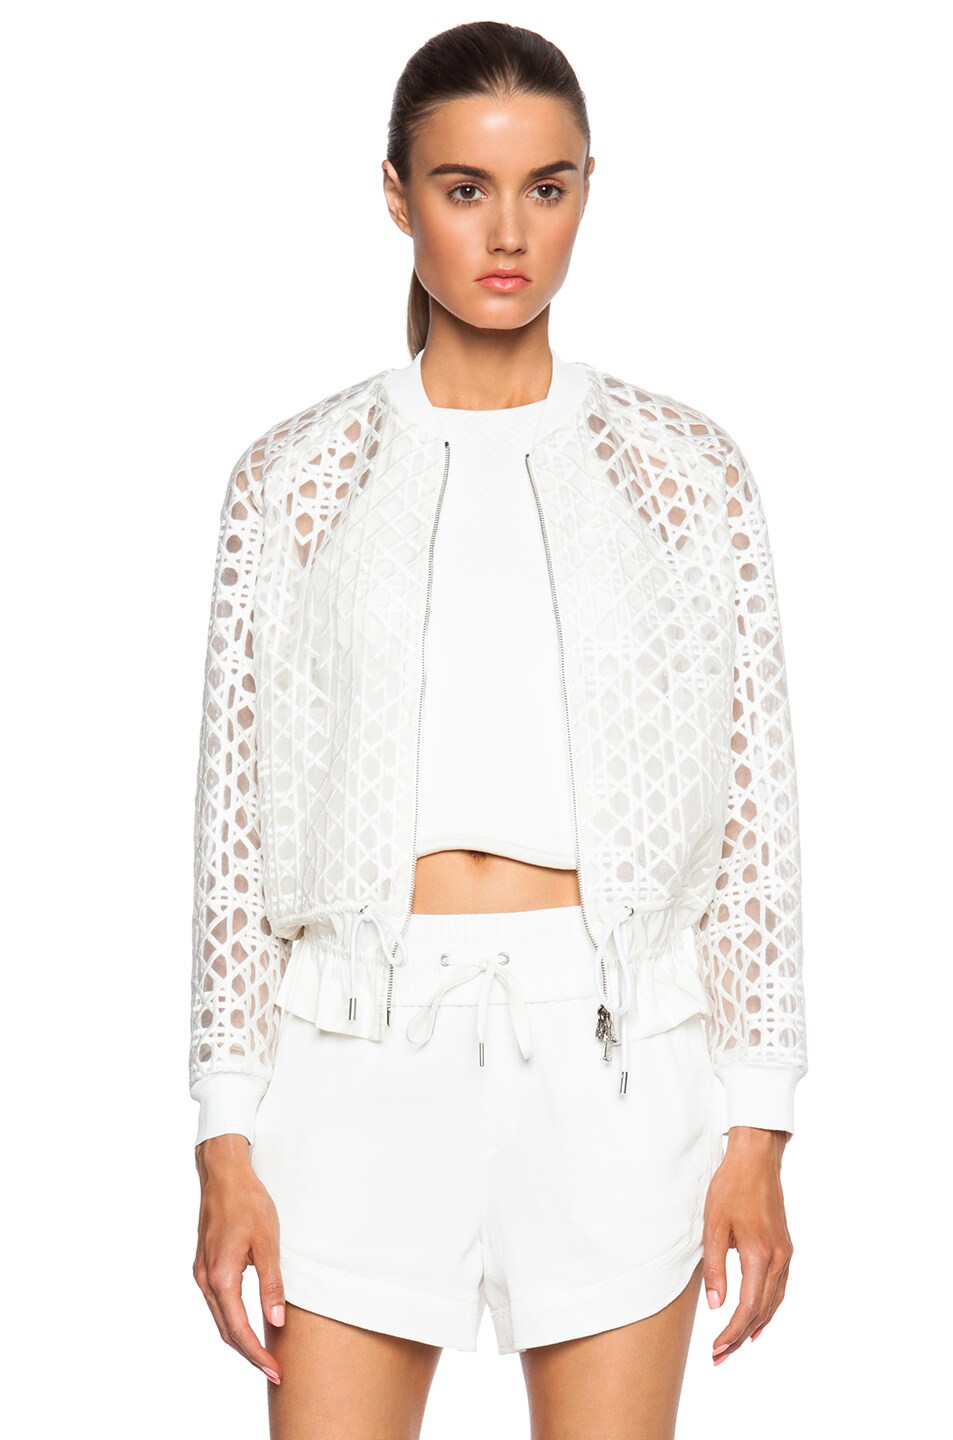 3.1 phillip lim Bomber with Drawstring Cinched Hem in Ivory & White | FWRD